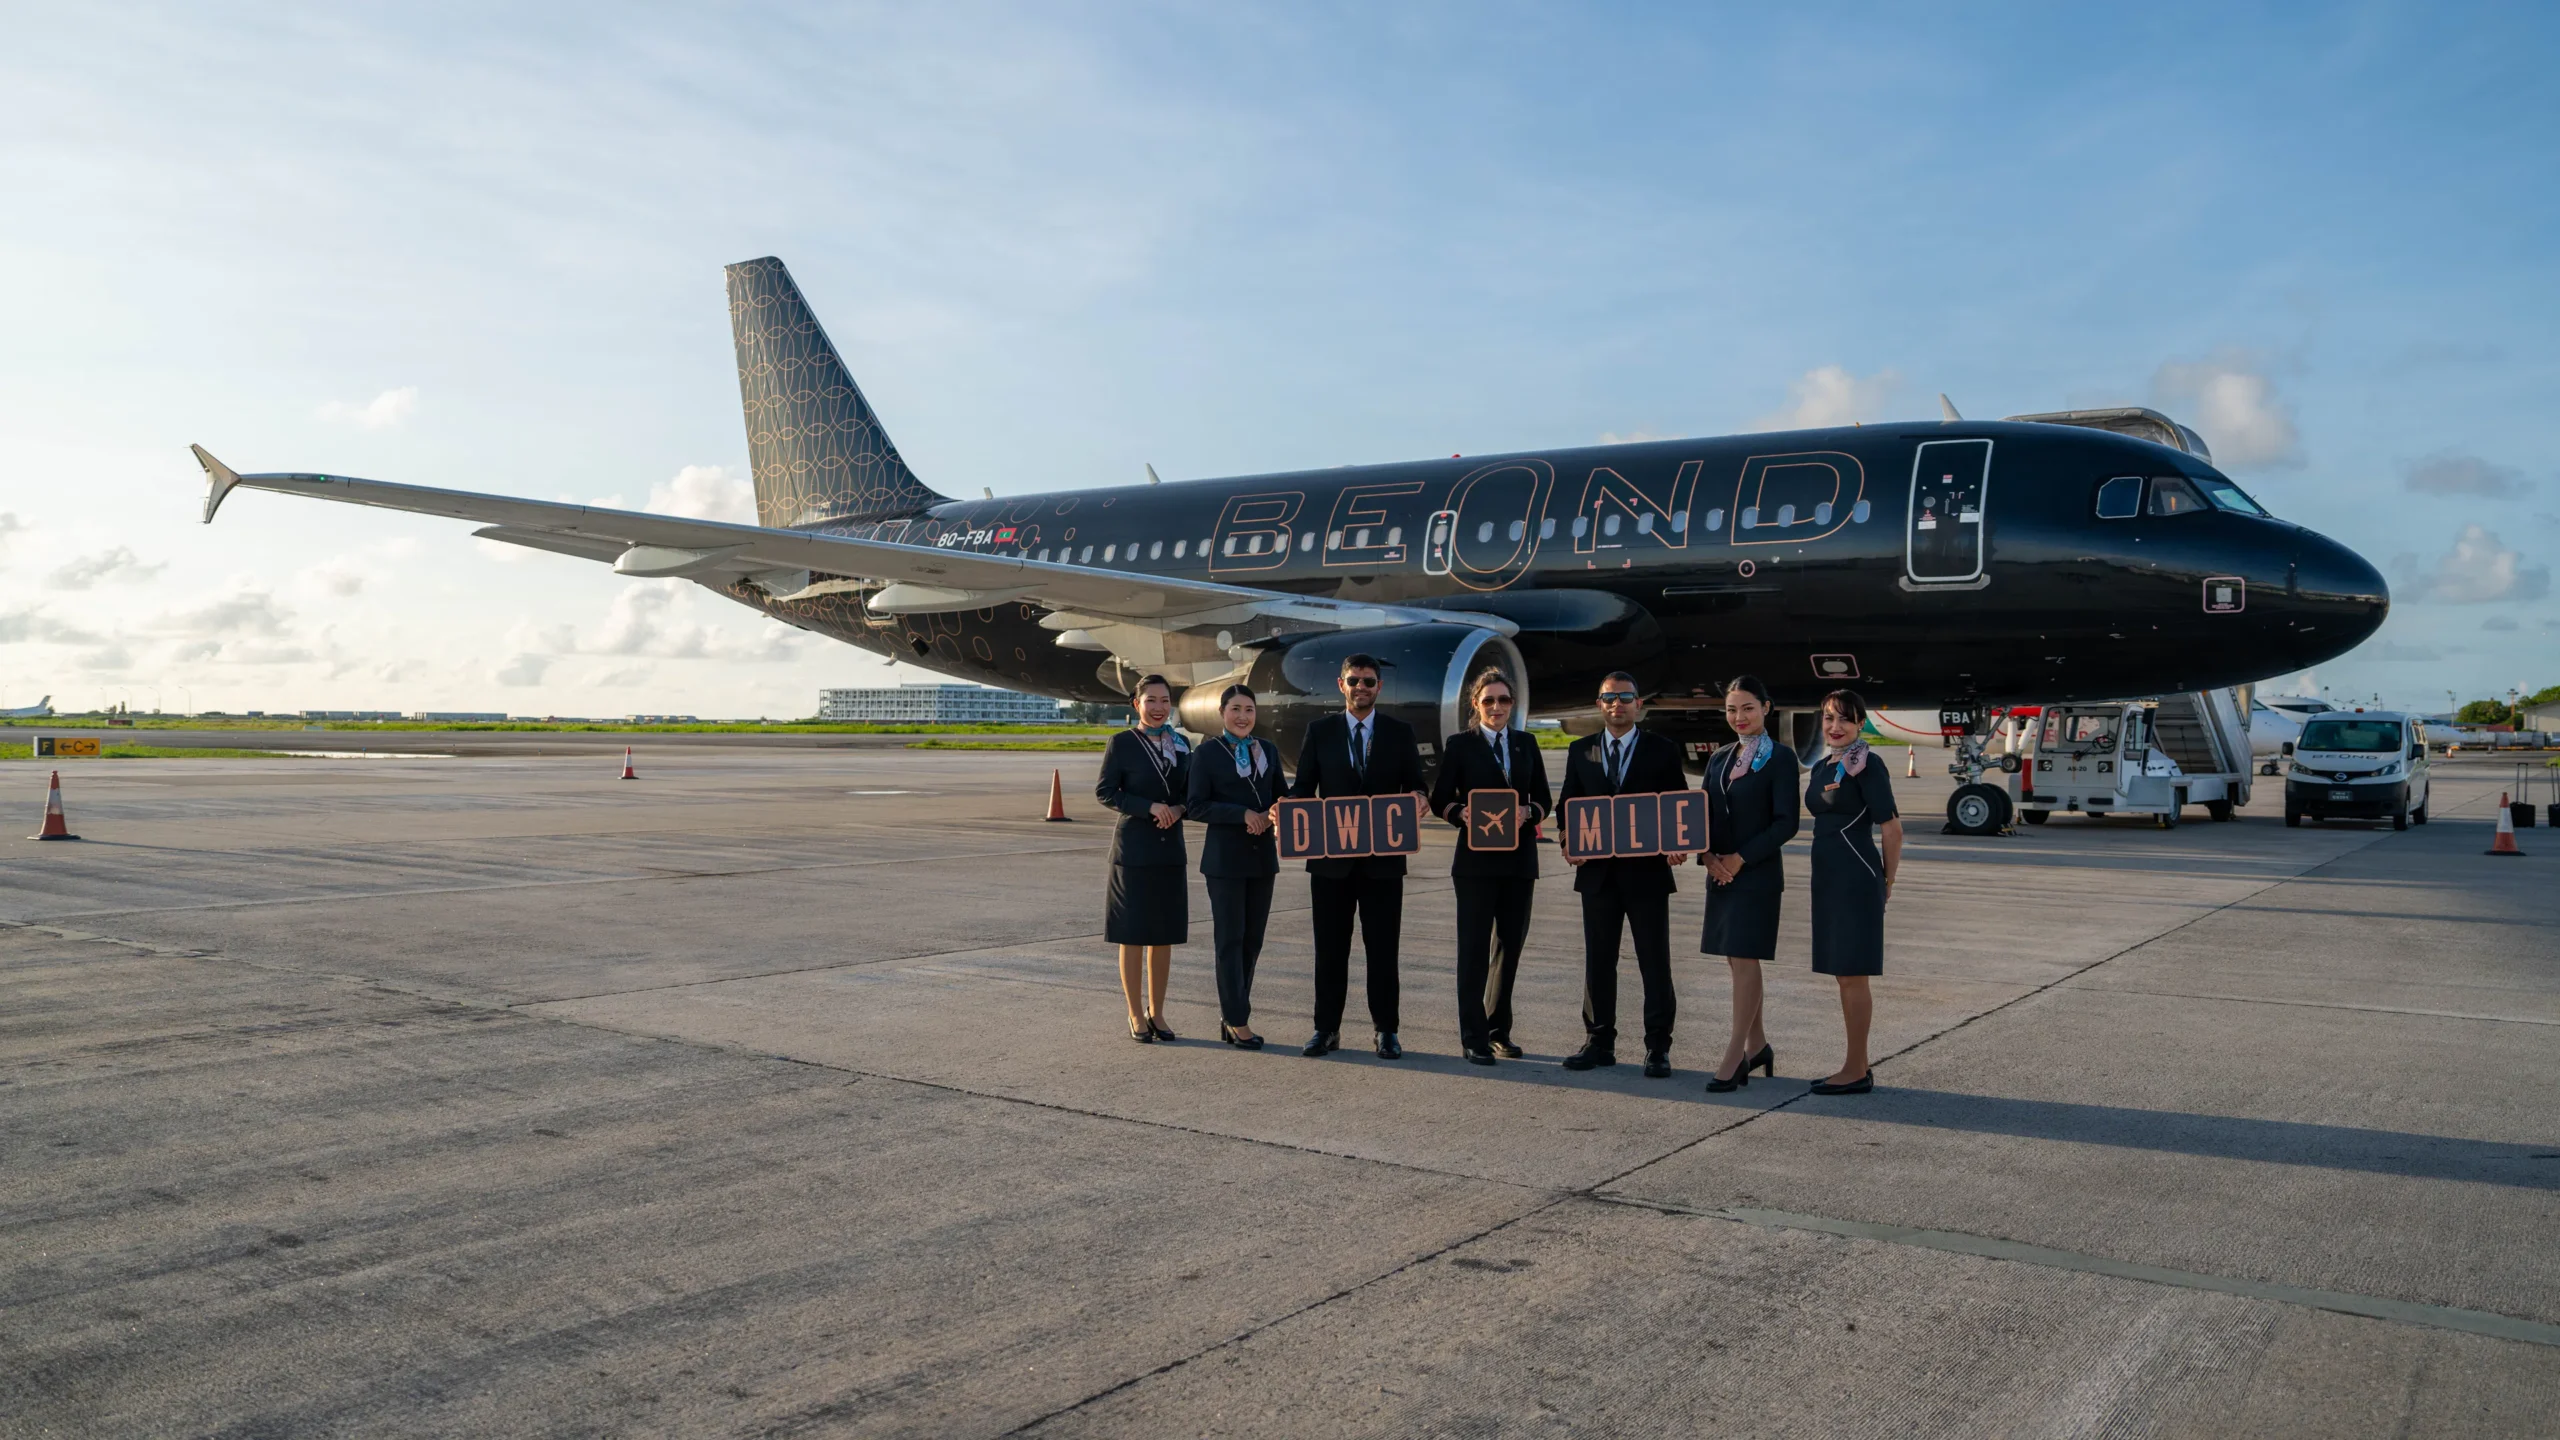 Beond Airline launches maiden commercial passenger flight from Dubai to Maldives.